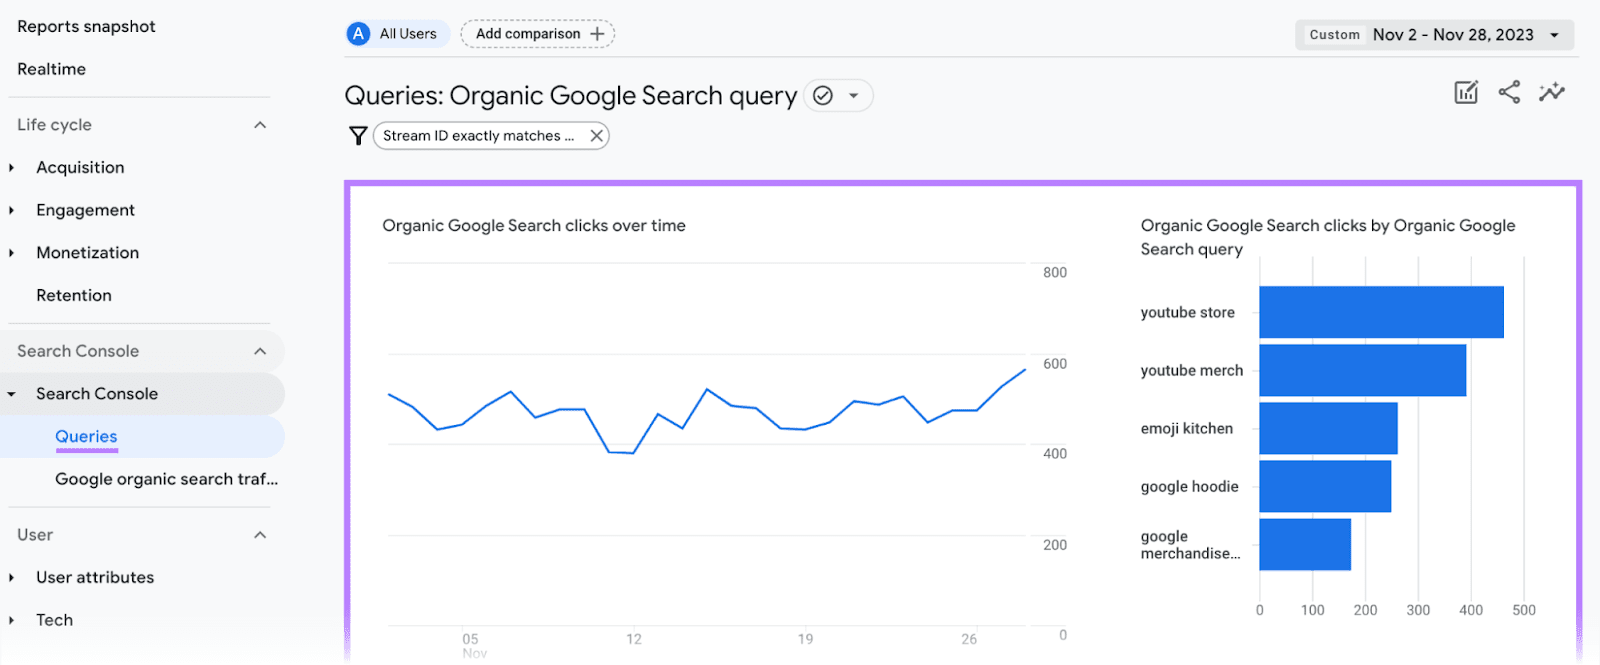 A report overview showing clicks from Google Search over time